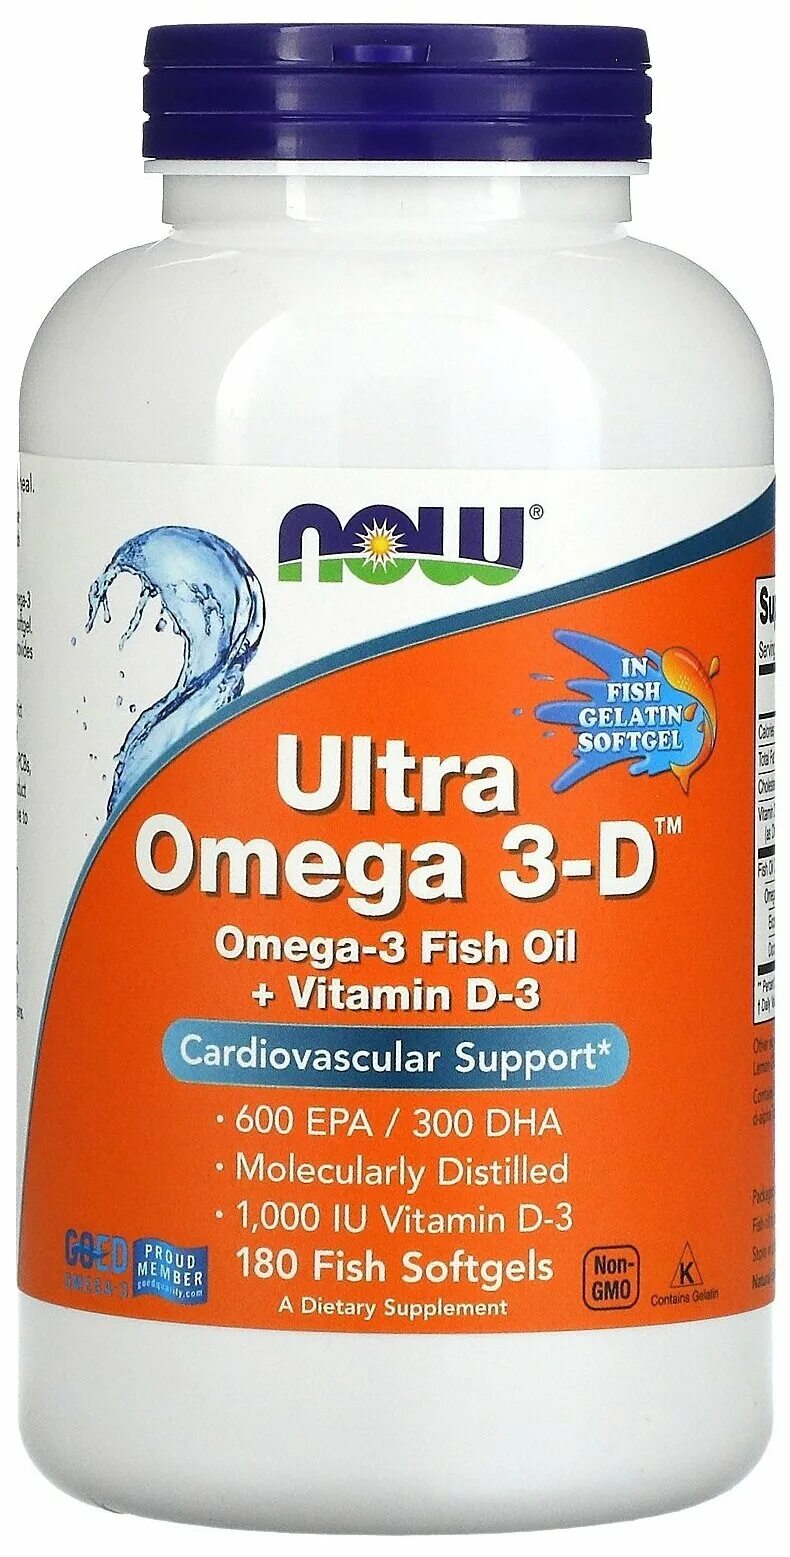 Ultra omega 3 капсулы now. Now Omega-3 1000 (200 капс.). Ультра Омега-3 180 капсул. Now Omega-3 1000 мг 200 капсул. Омега-3 180 EPA/120 DHA,.